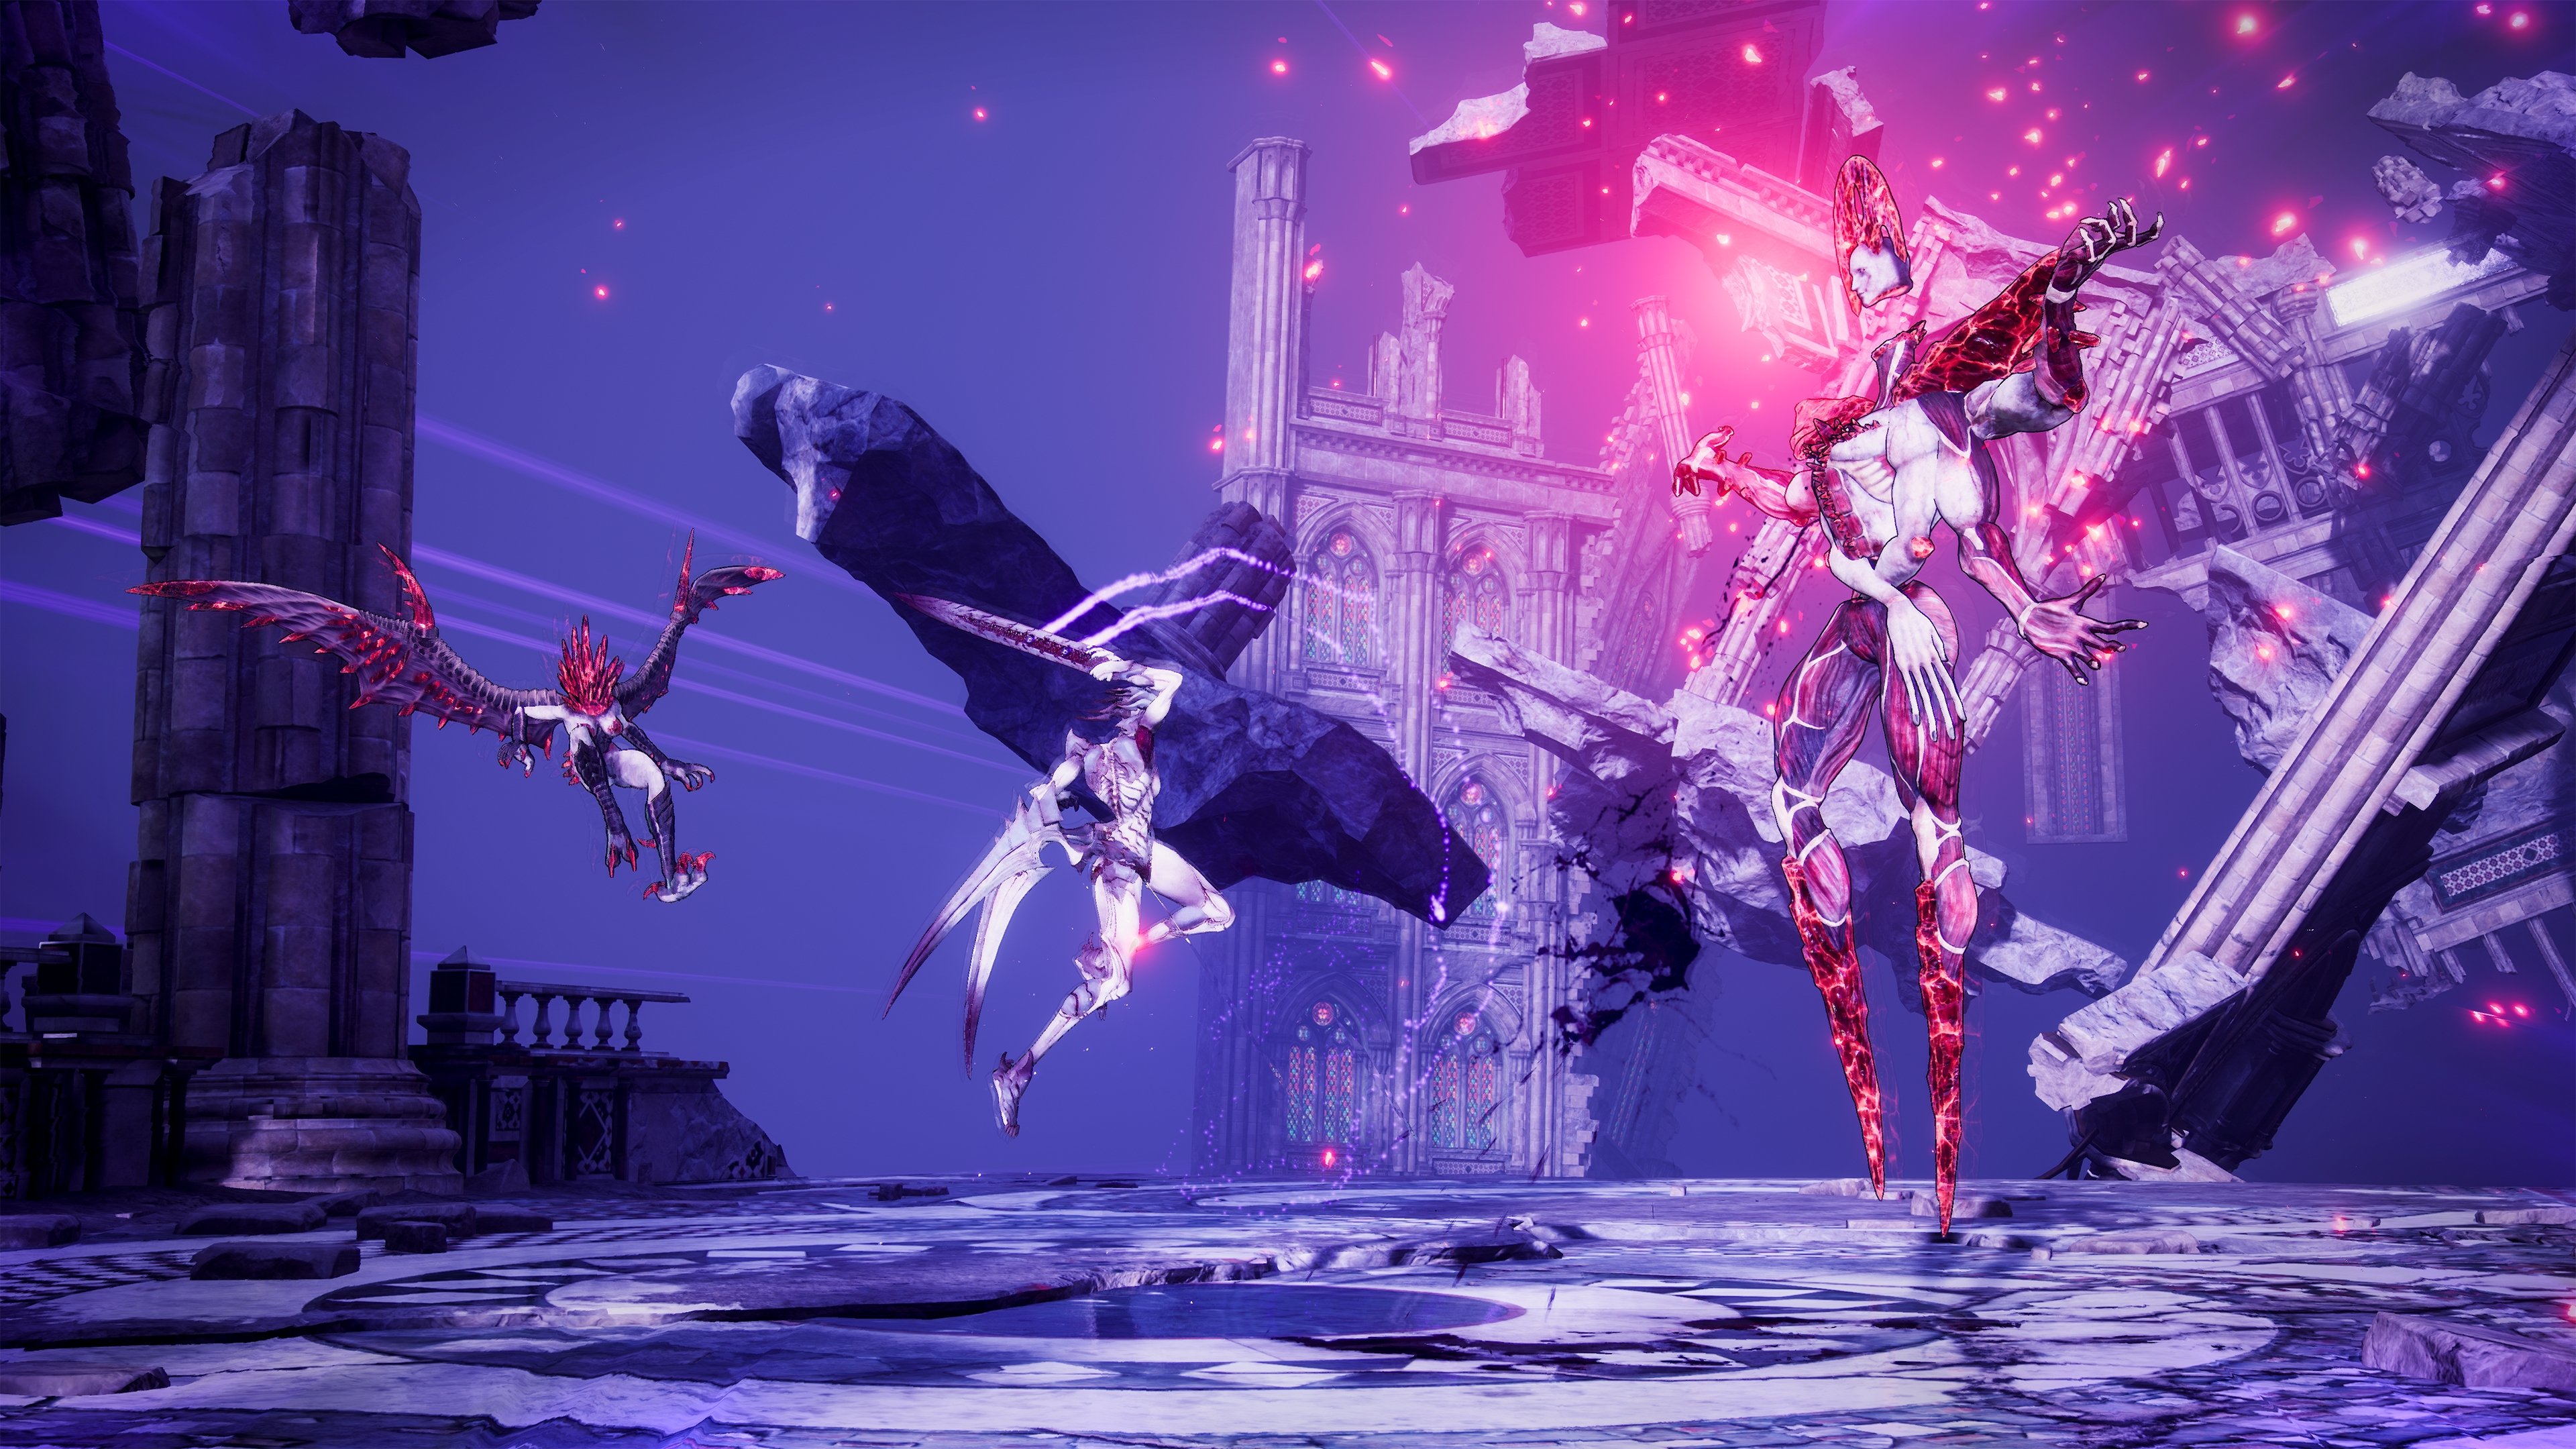 Soulstice ARPG Gets Fall Release Window and 11 Minutes of Gameplay